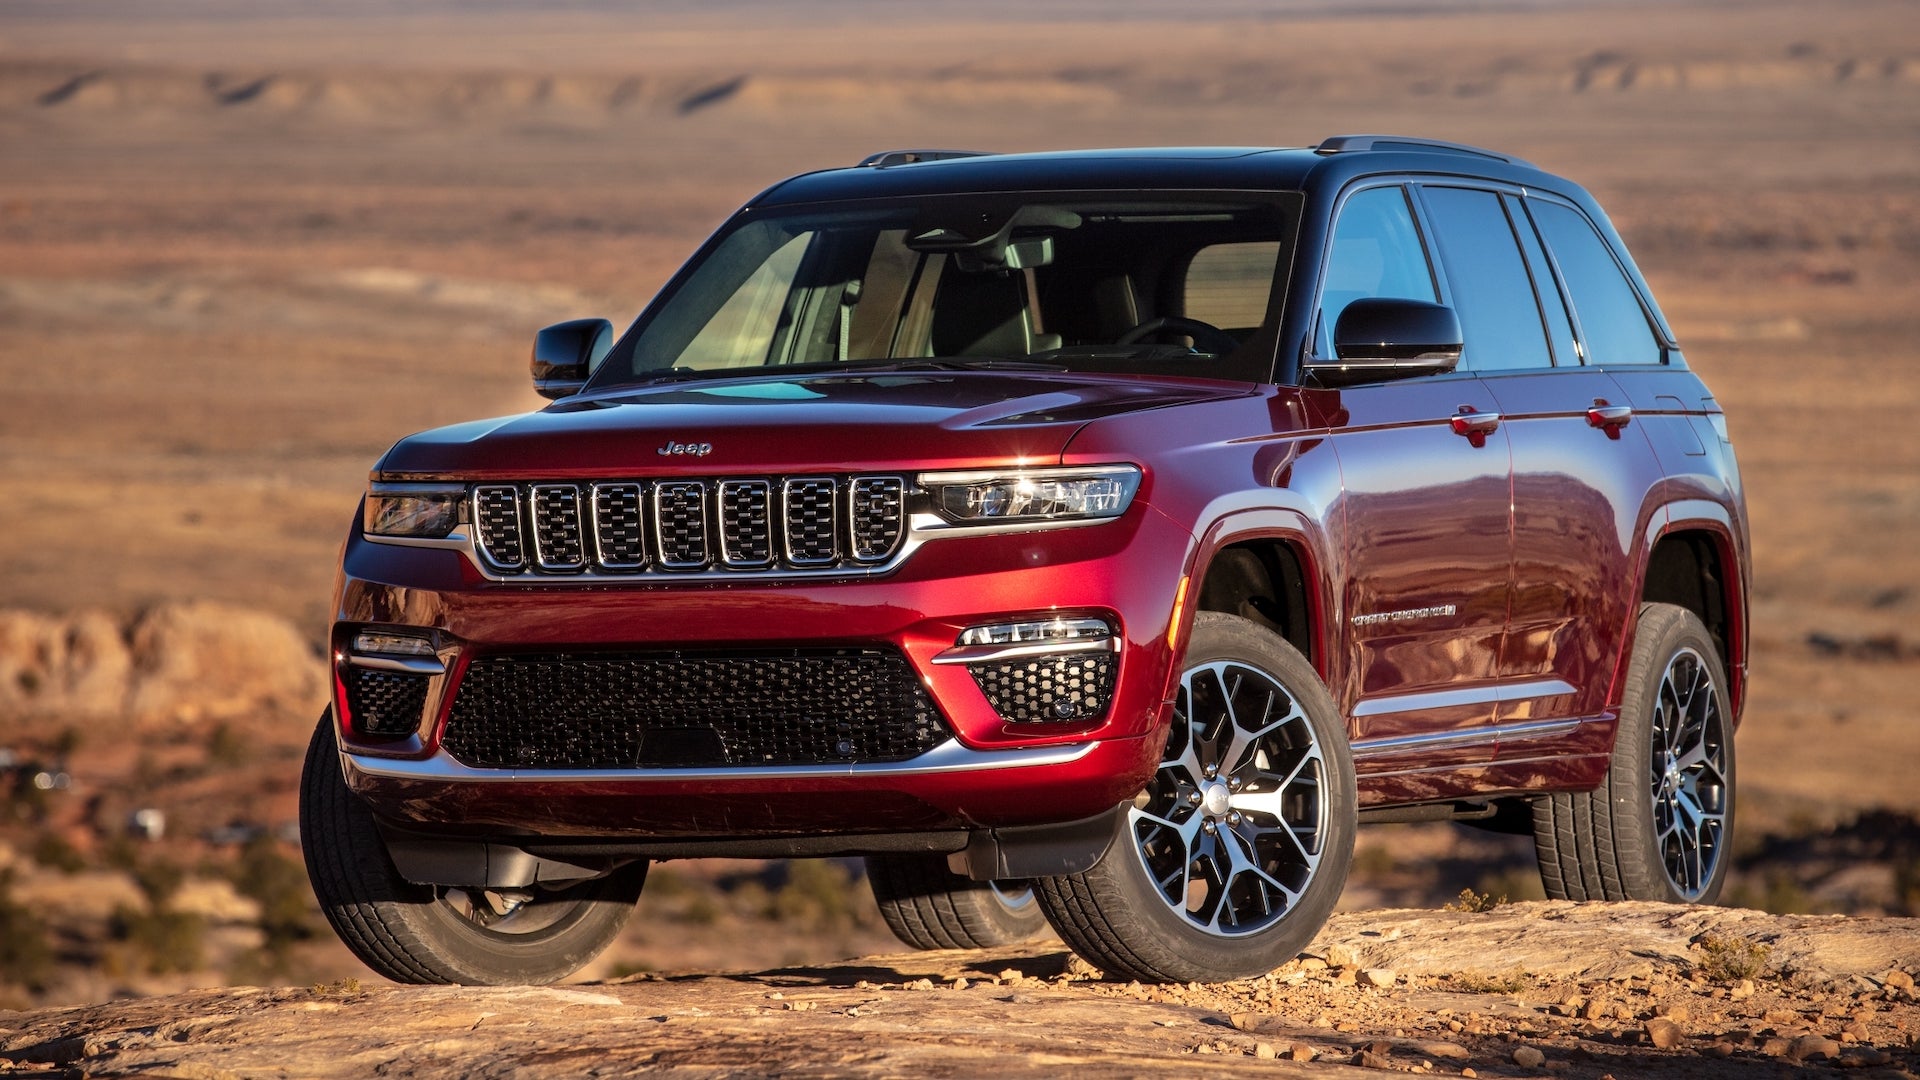 2023 Jeep Grand Cherokee Loses 5.7L V8 in a Sign of What’s to Come